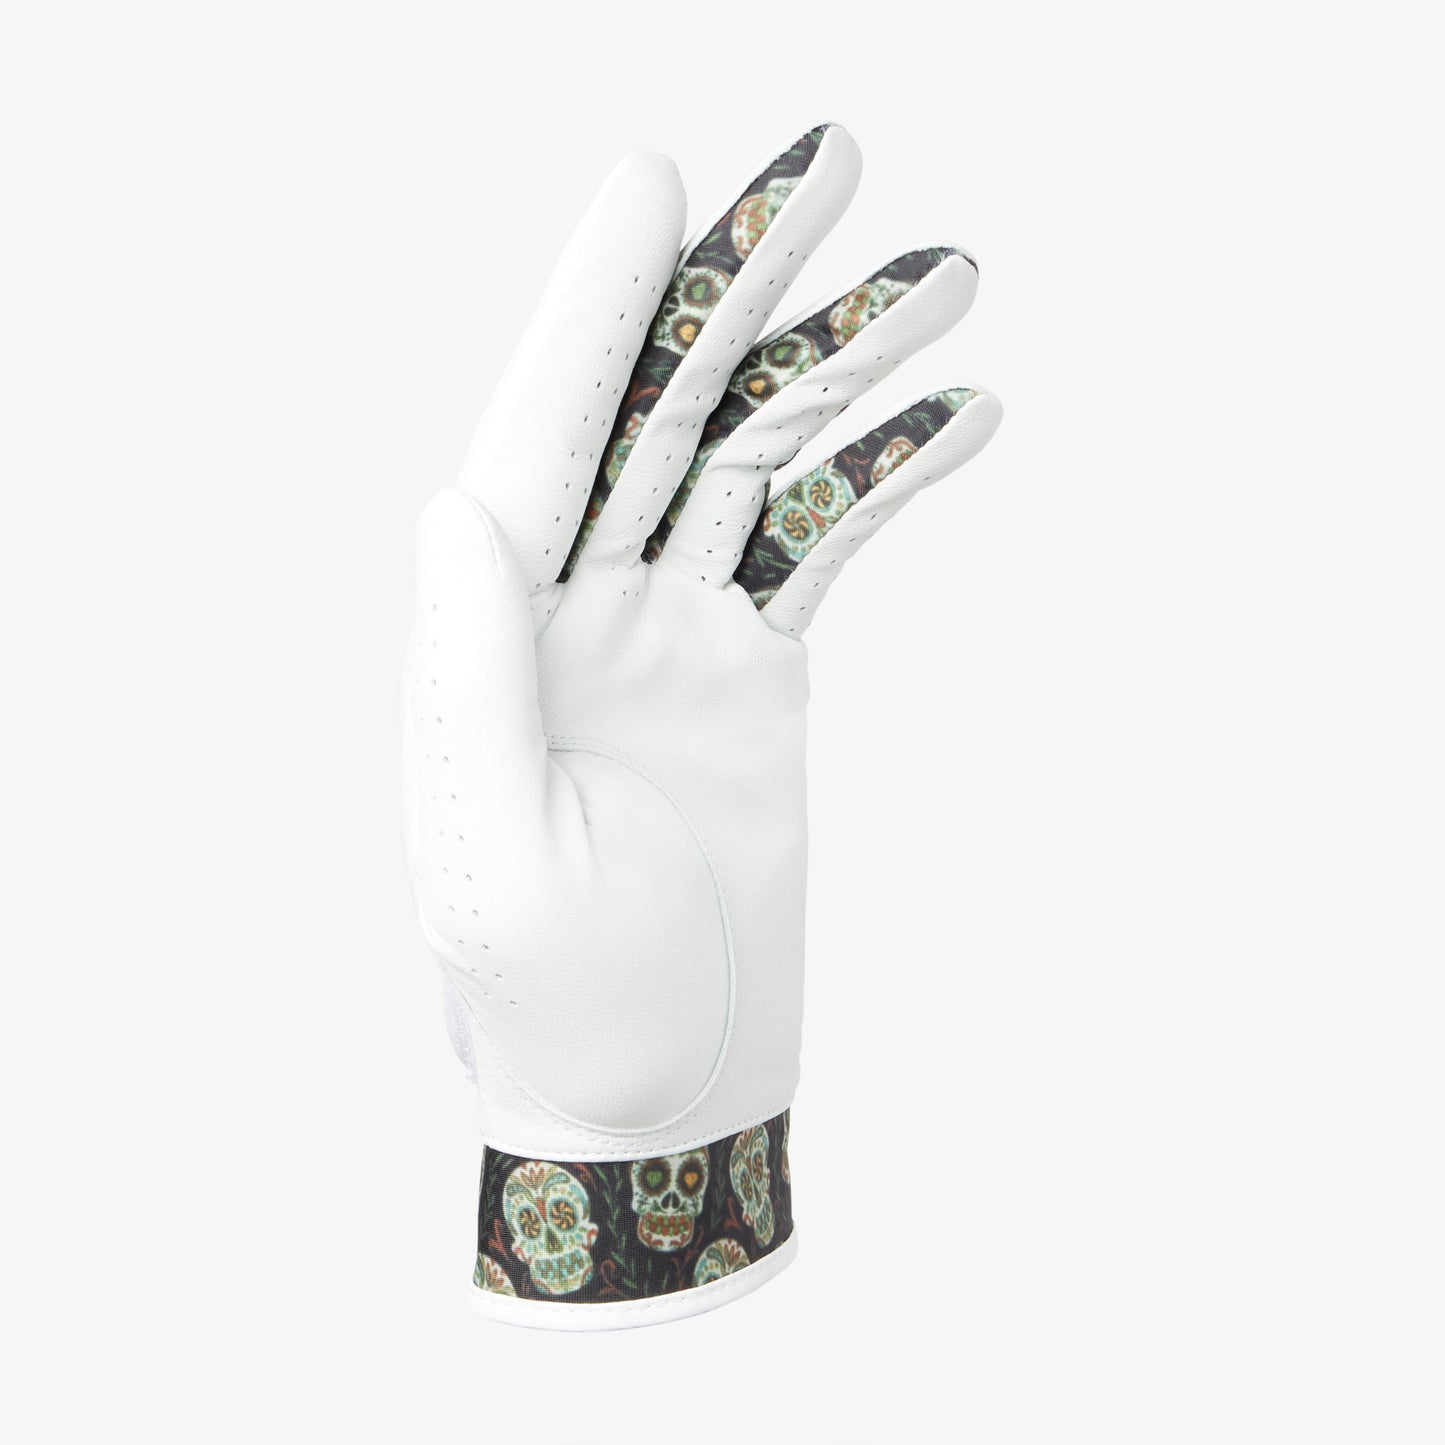 White leather golf glove with cool design